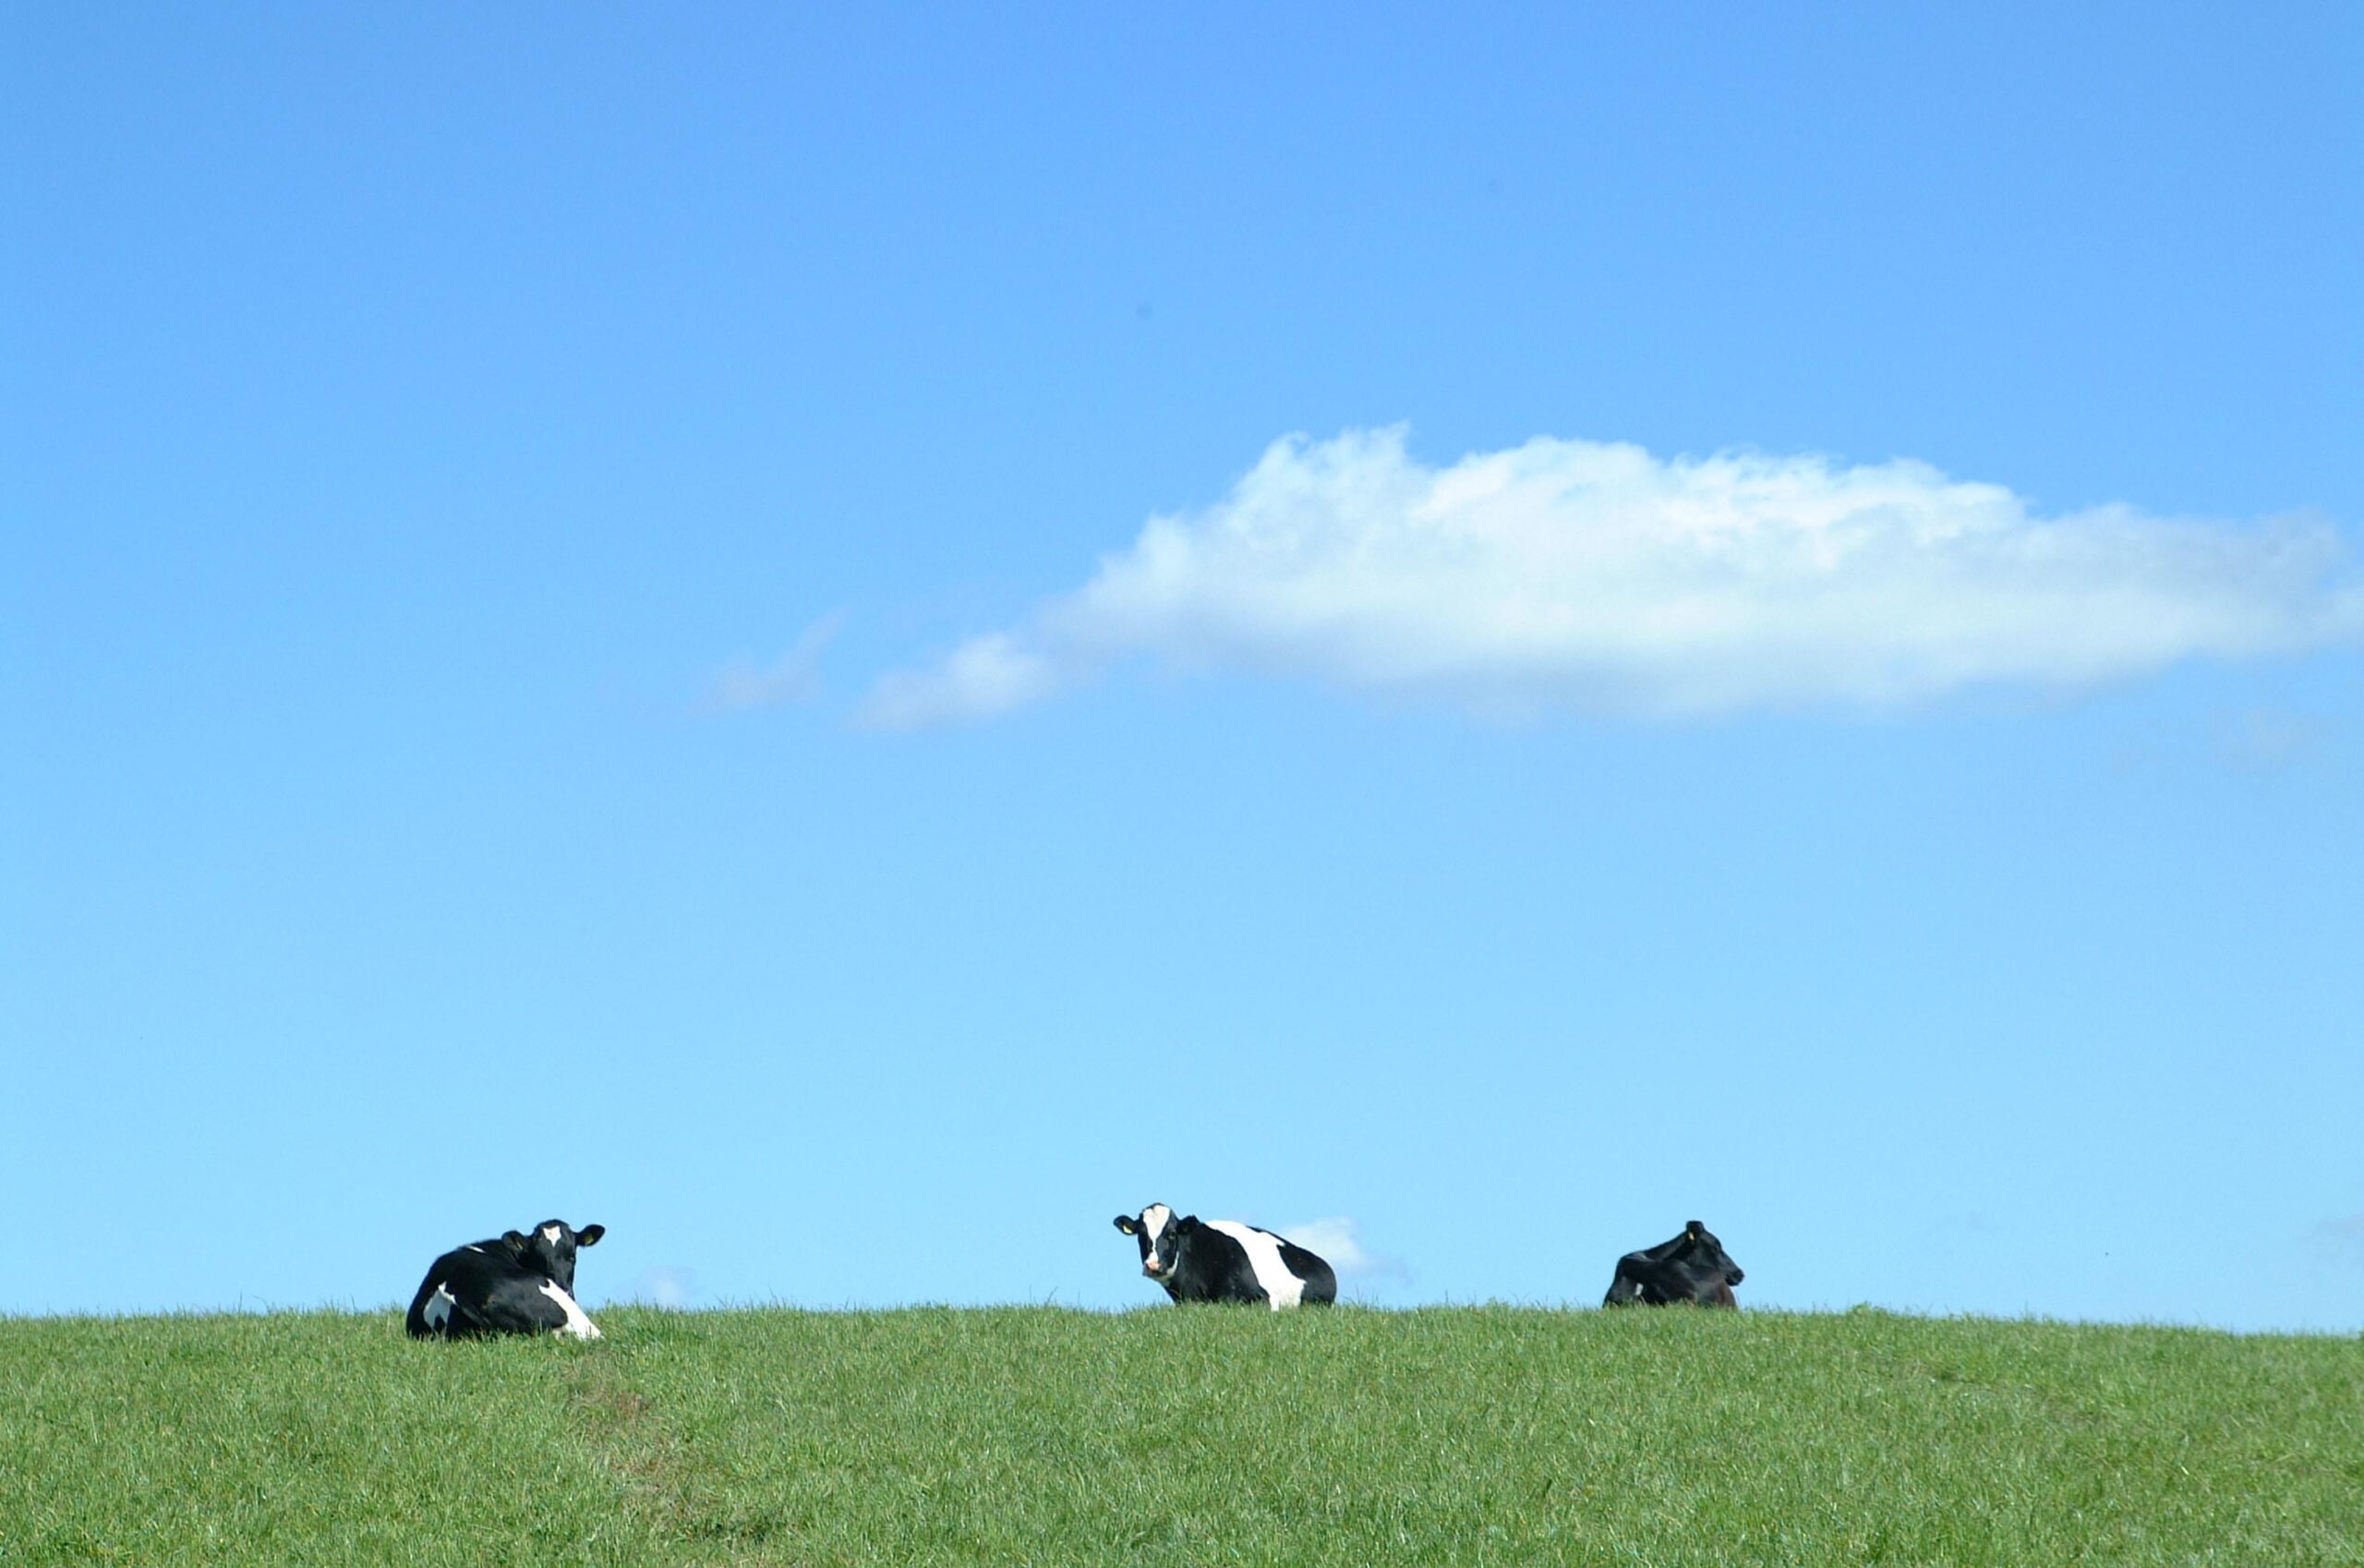 ‘The Stillness of the Cows’ – a poem by Robert Etty